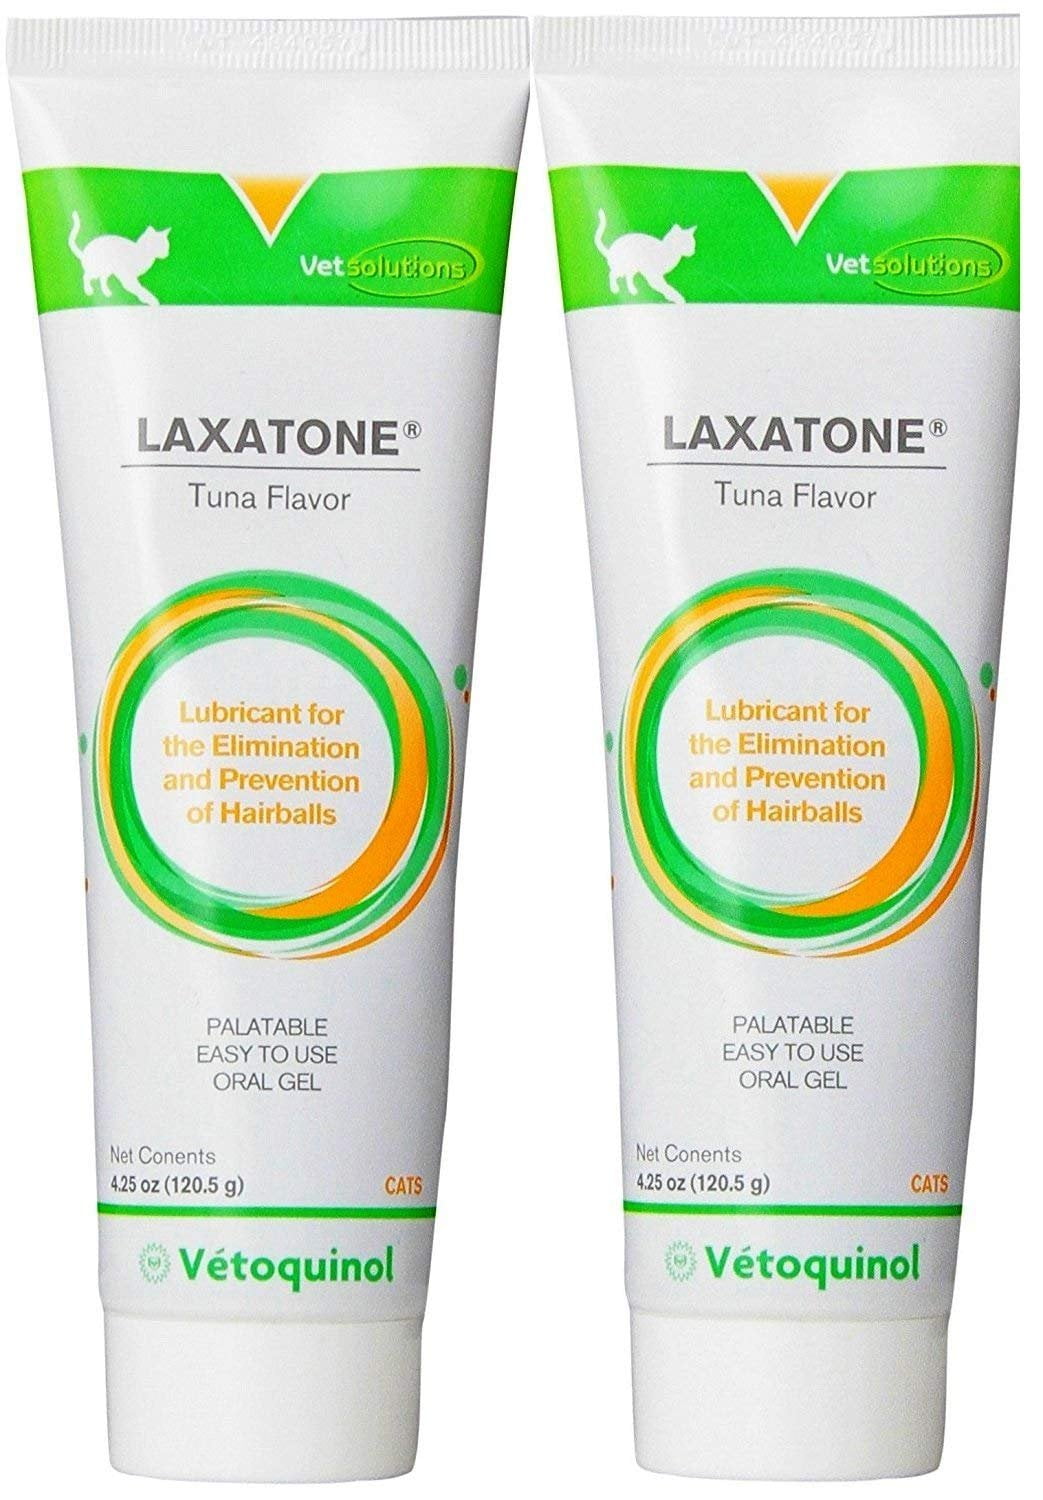 Laxatone for Cats (4.25 oz) by Vetoquinol, On Sale